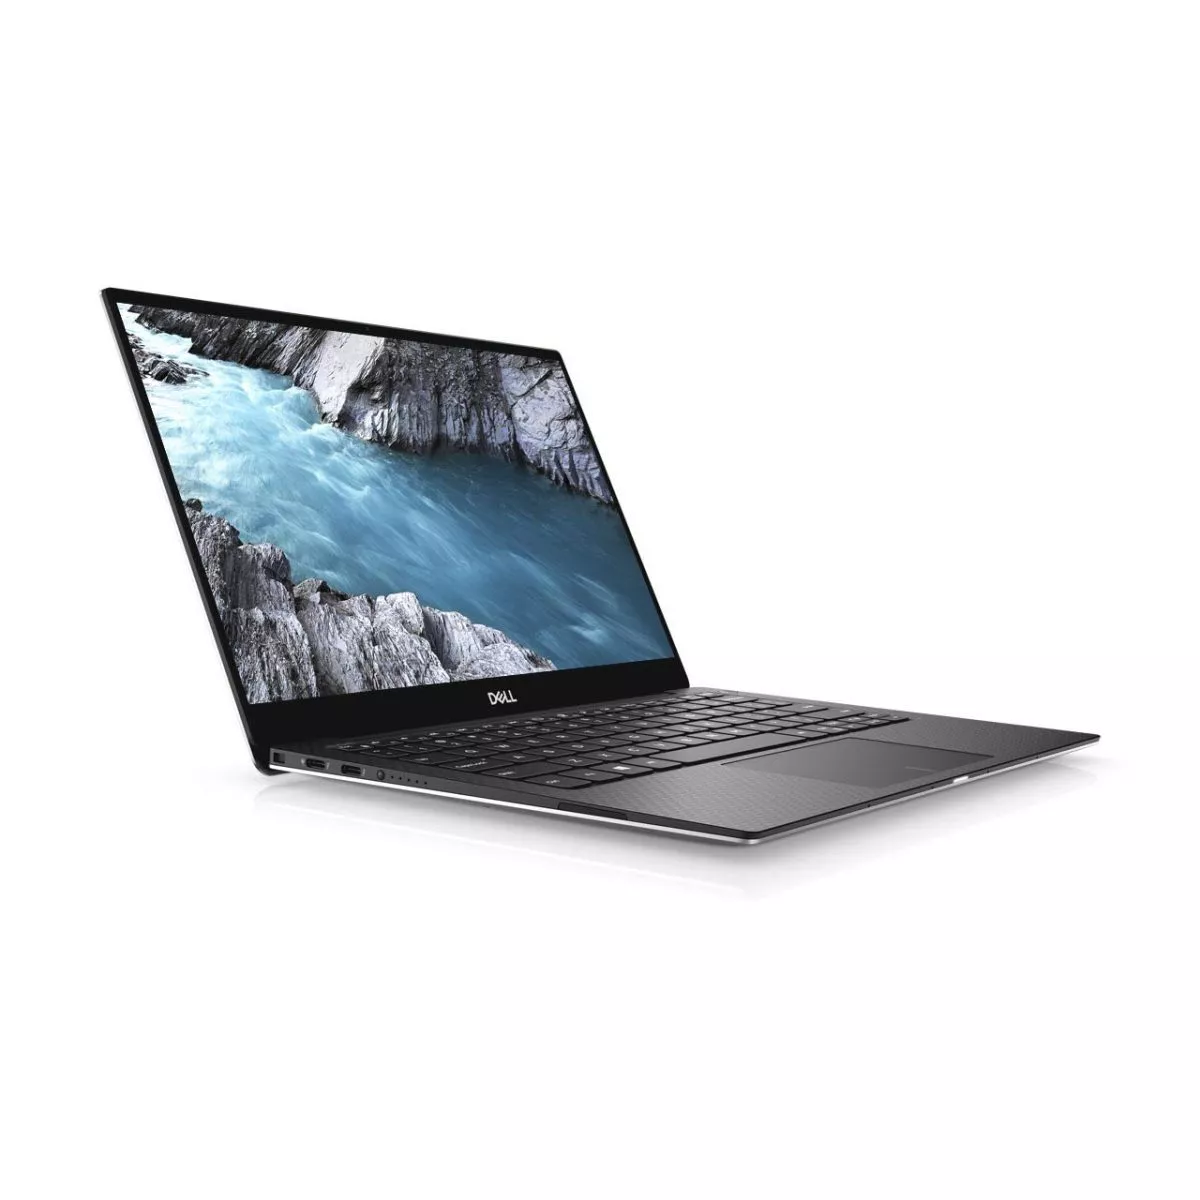 DELL XPS 13 7390 2-in-1 Platinum Silver, 13.3" UHD WLED Touch (Intel® Core™ i7-1065G7, 16GB 3733MHz фото